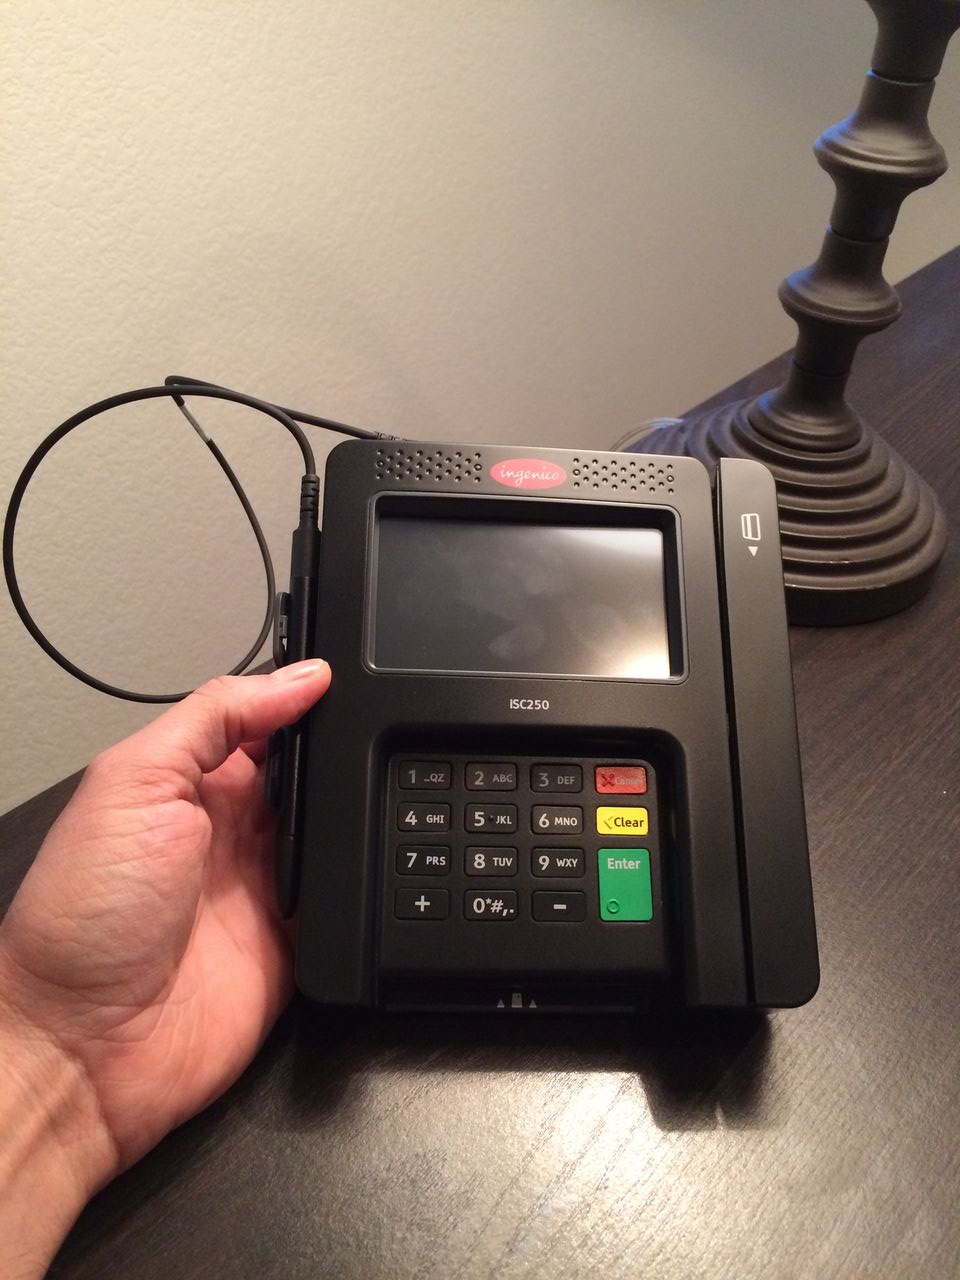 Skimmers Found at Walmart: A Closer Look – Krebs on Security